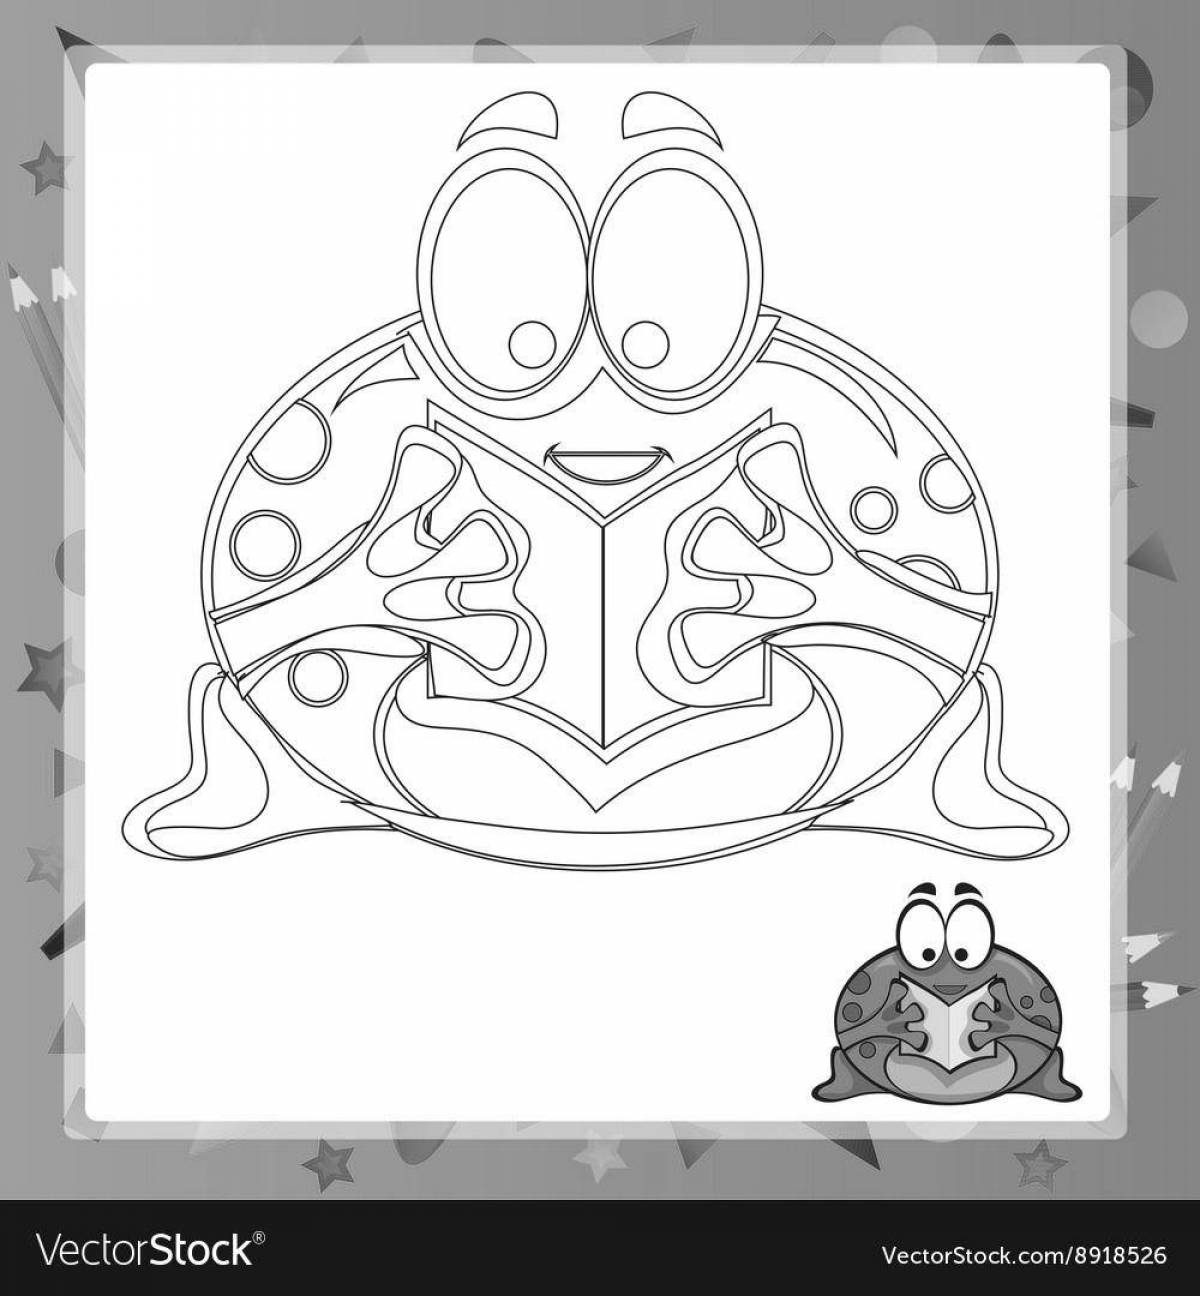 Froggy's cute coloring book